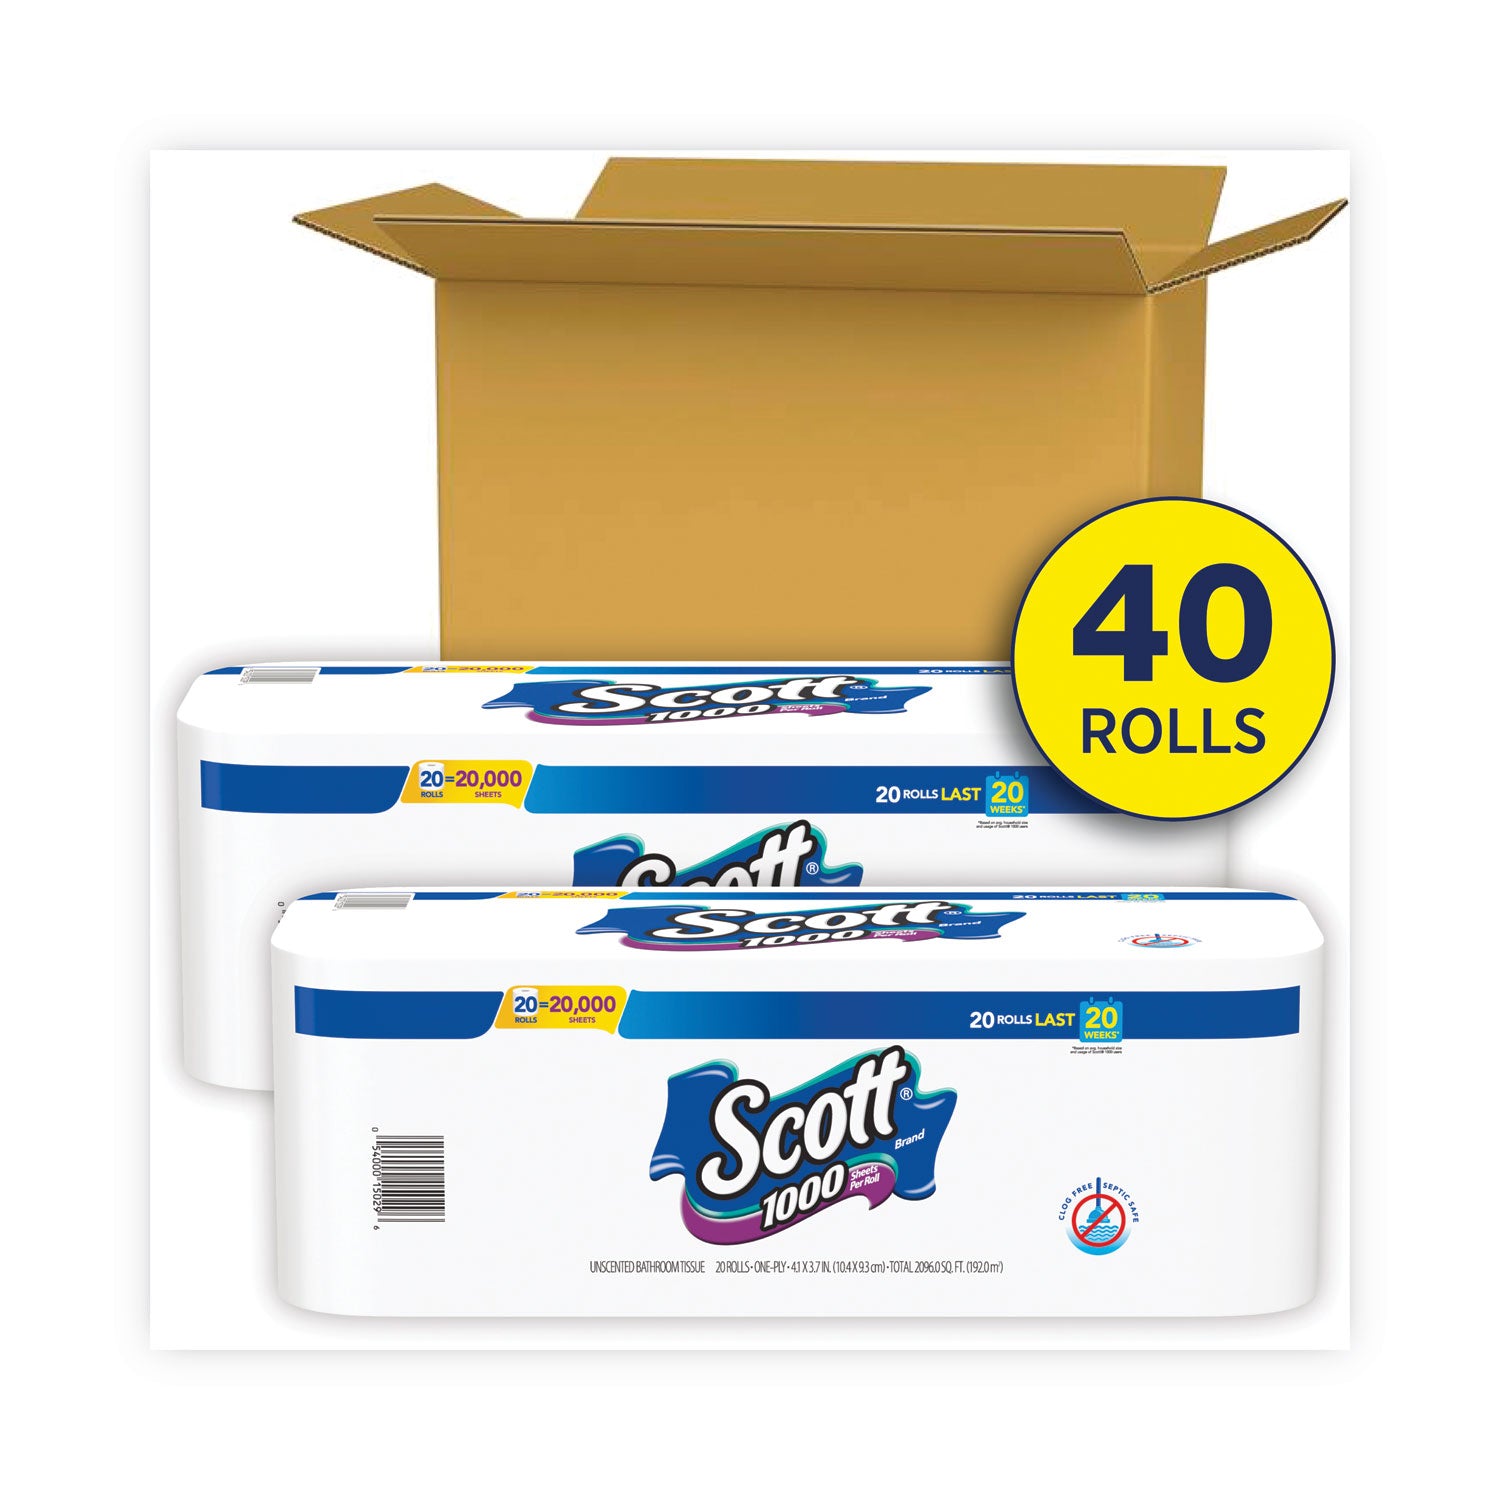 standard-roll-bathroom-tissue-septic-safe-1-ply-white-1000-sheets-roll-20-pack-2-packs-carton_kcc20032ct - 2